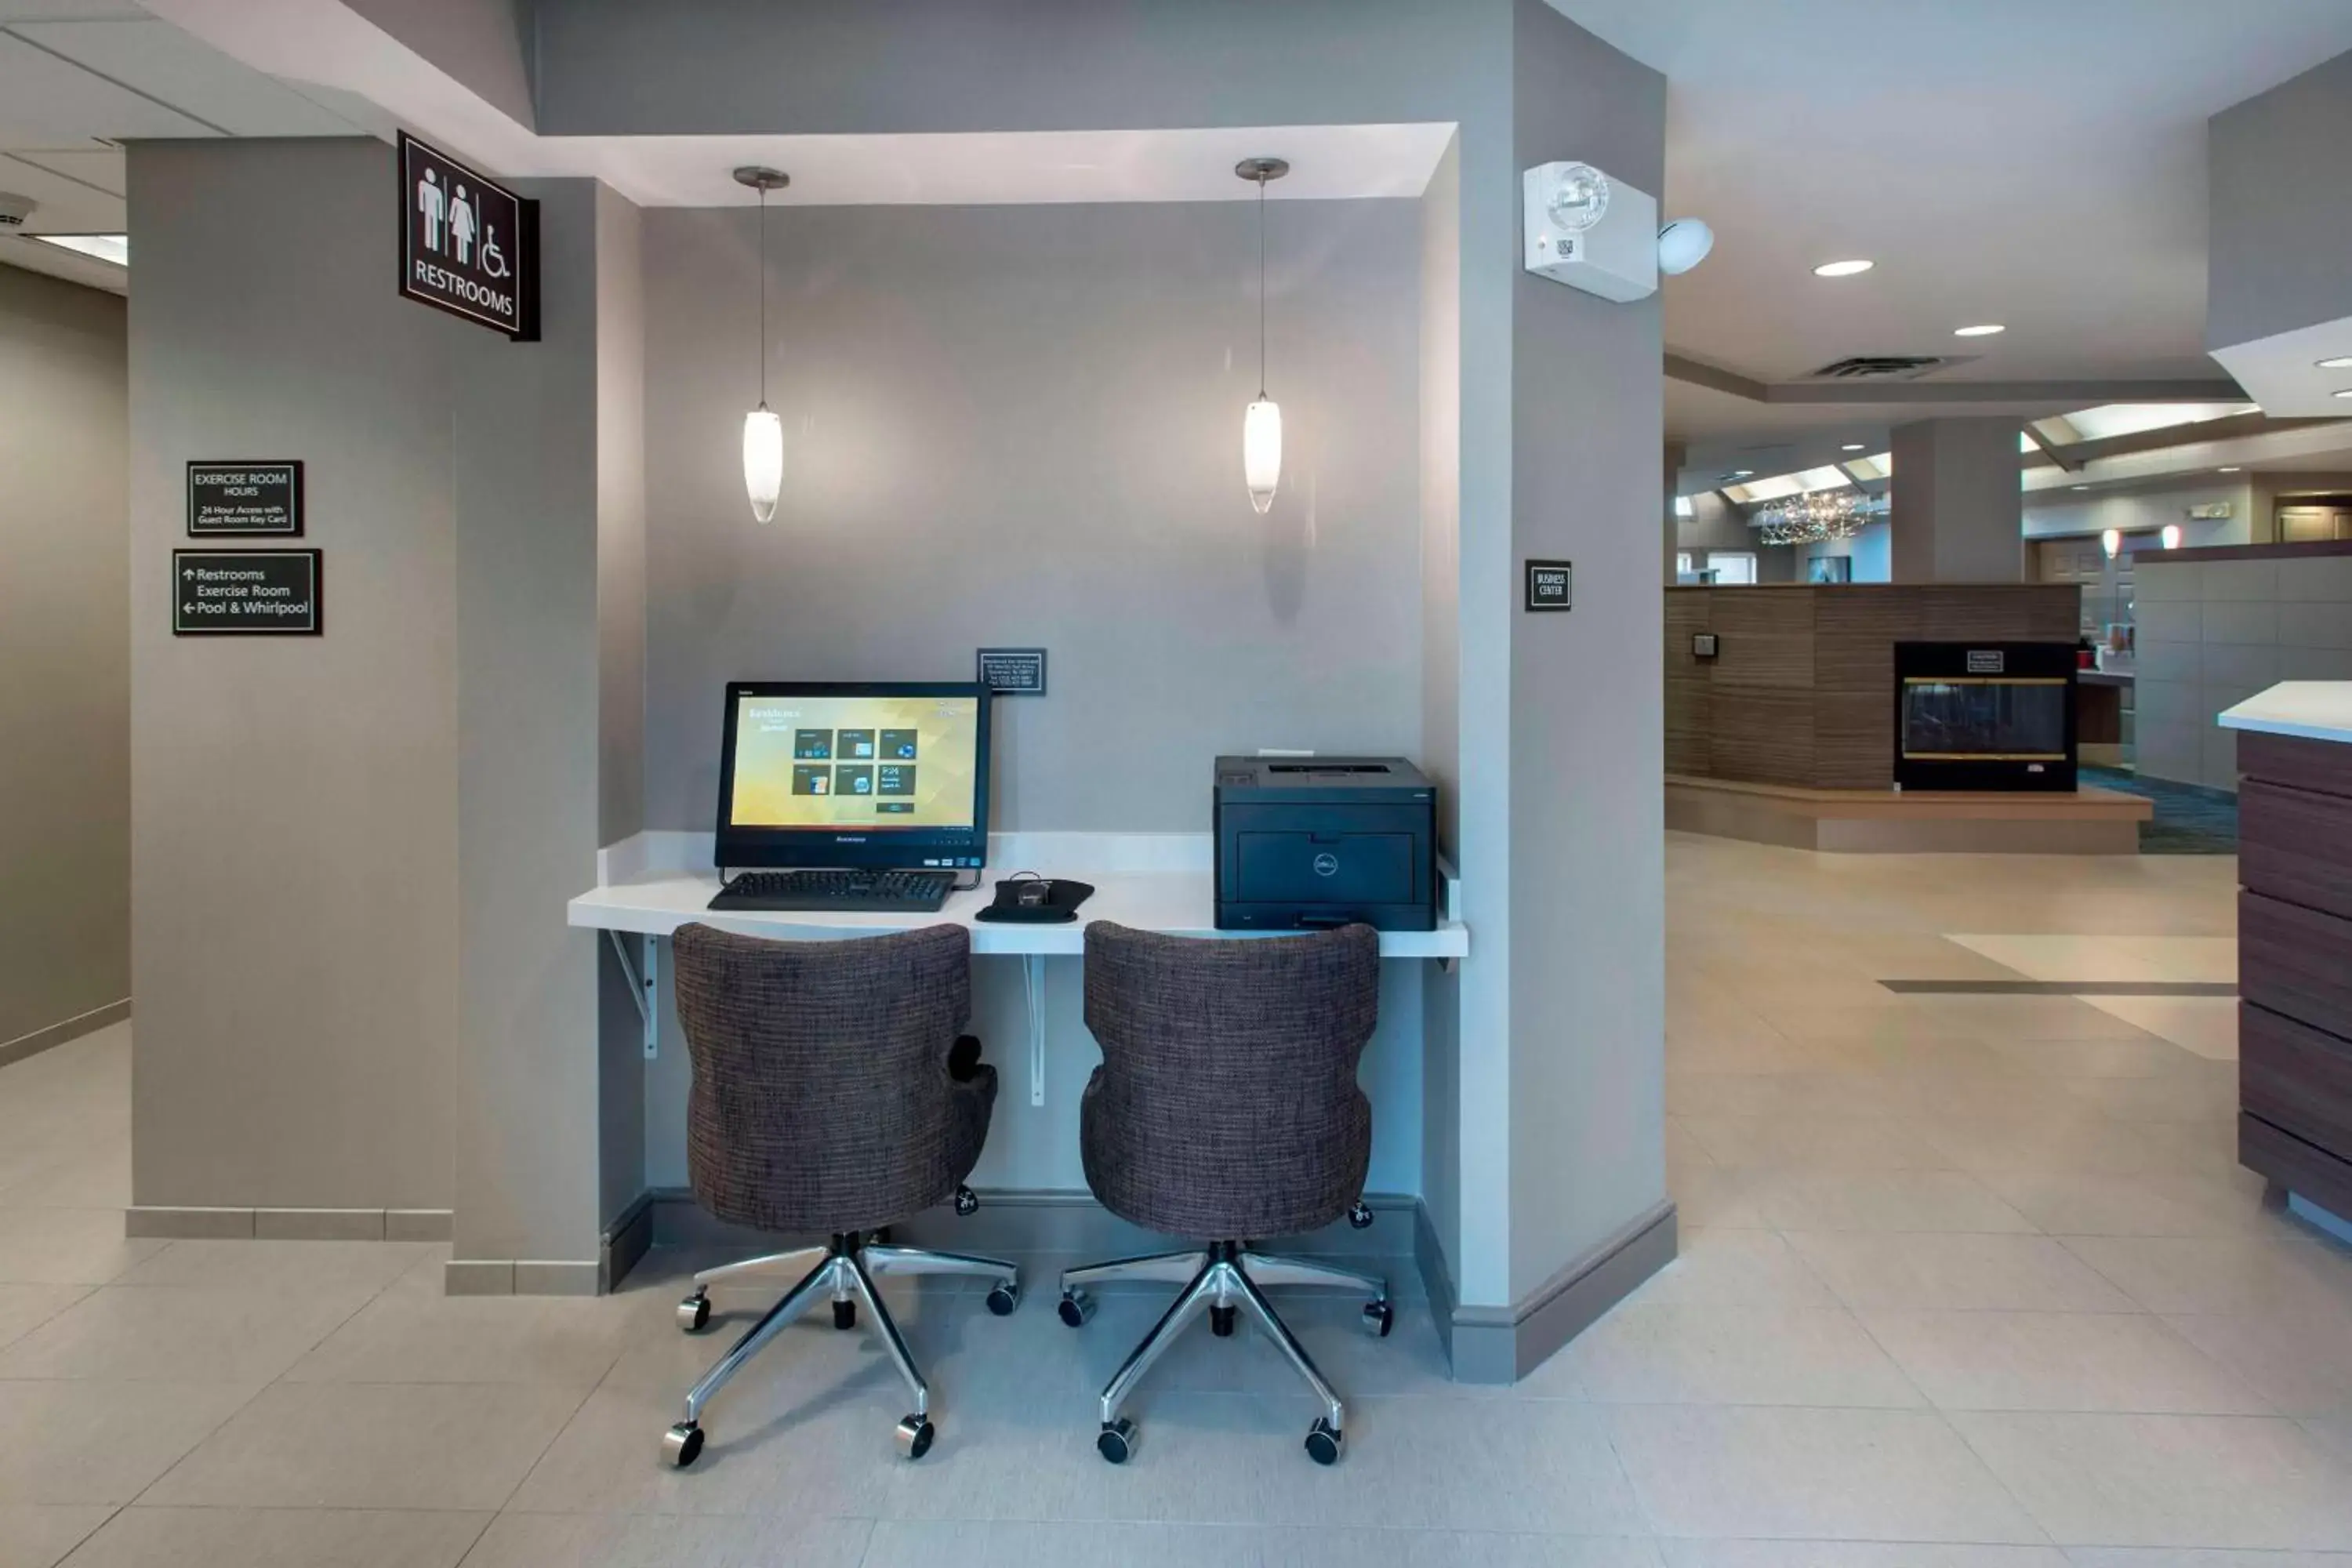 Business facilities in Residence Inn by Marriott Somerset